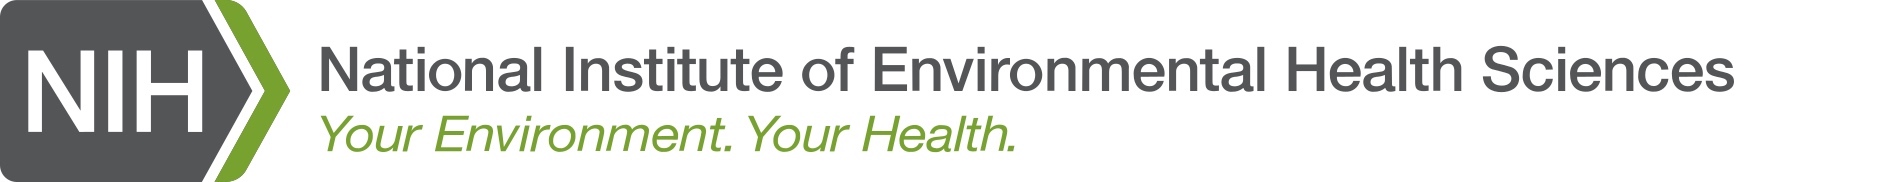 United States National Institute of Environmental Health Sciences